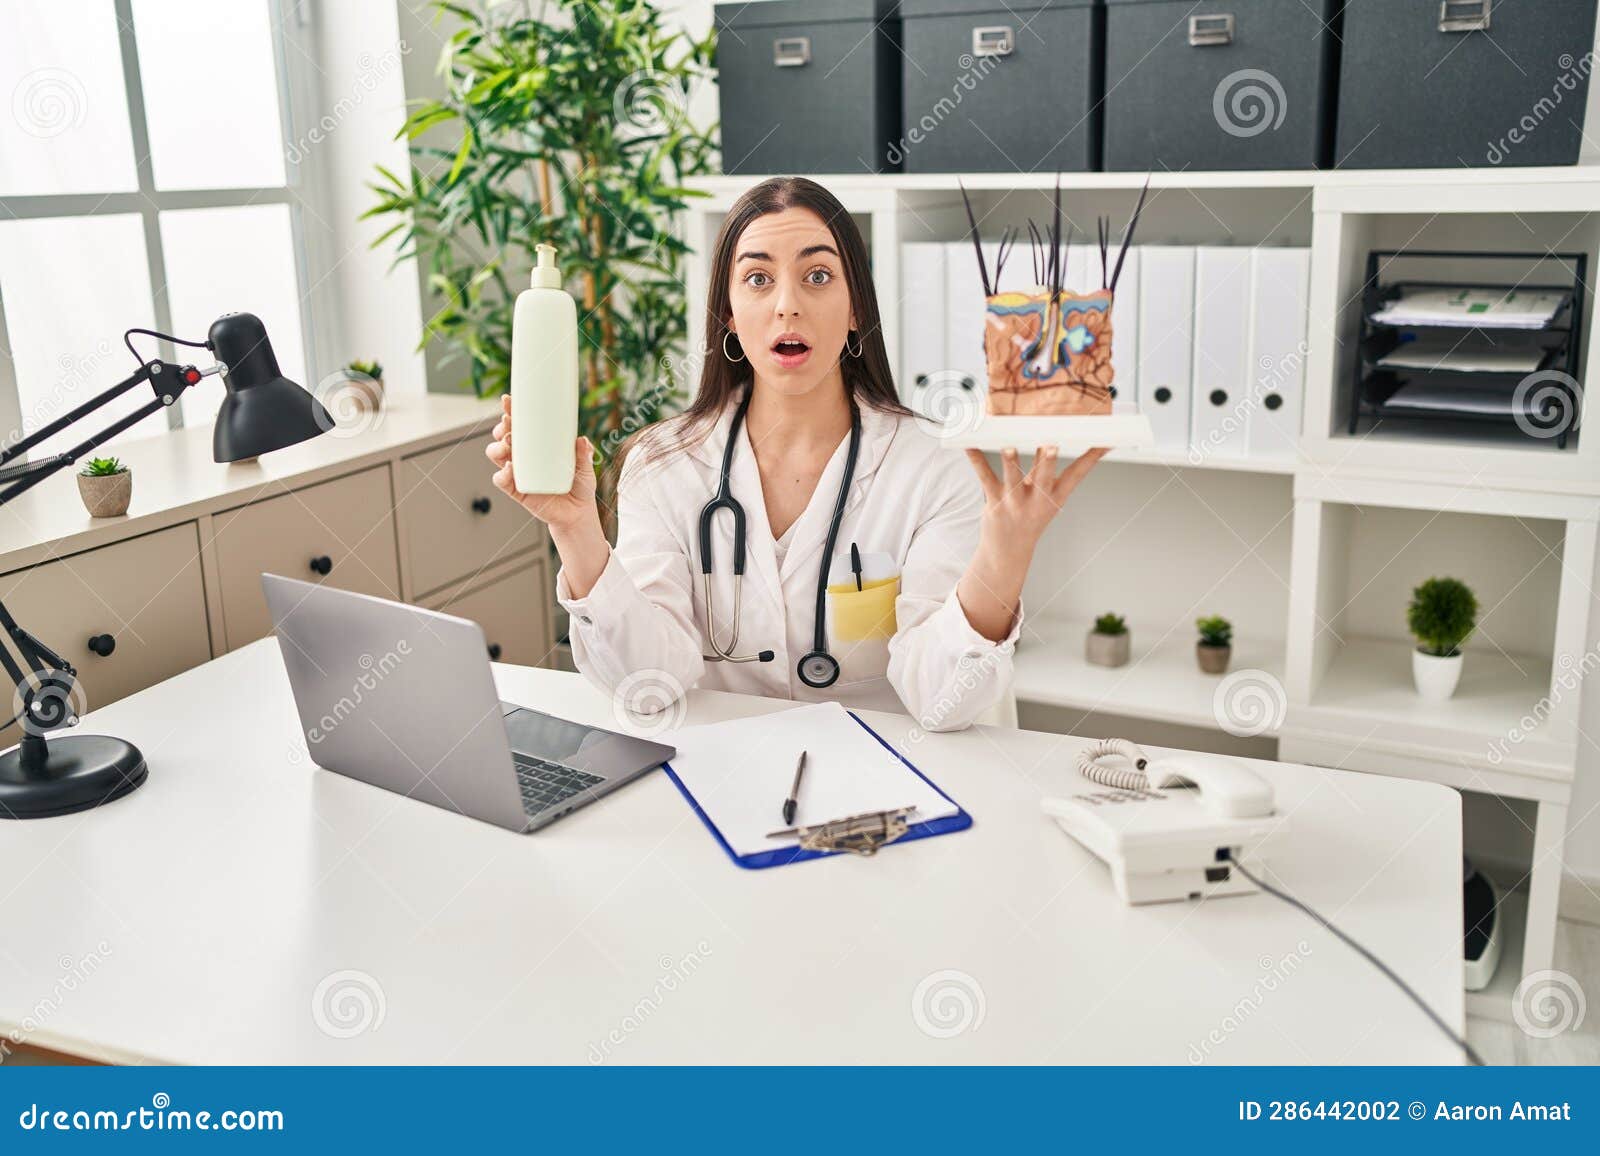 hispanic doctor woman holding model of human anatomical skin and hair afraid and shocked with surprise and amazed expression, fear